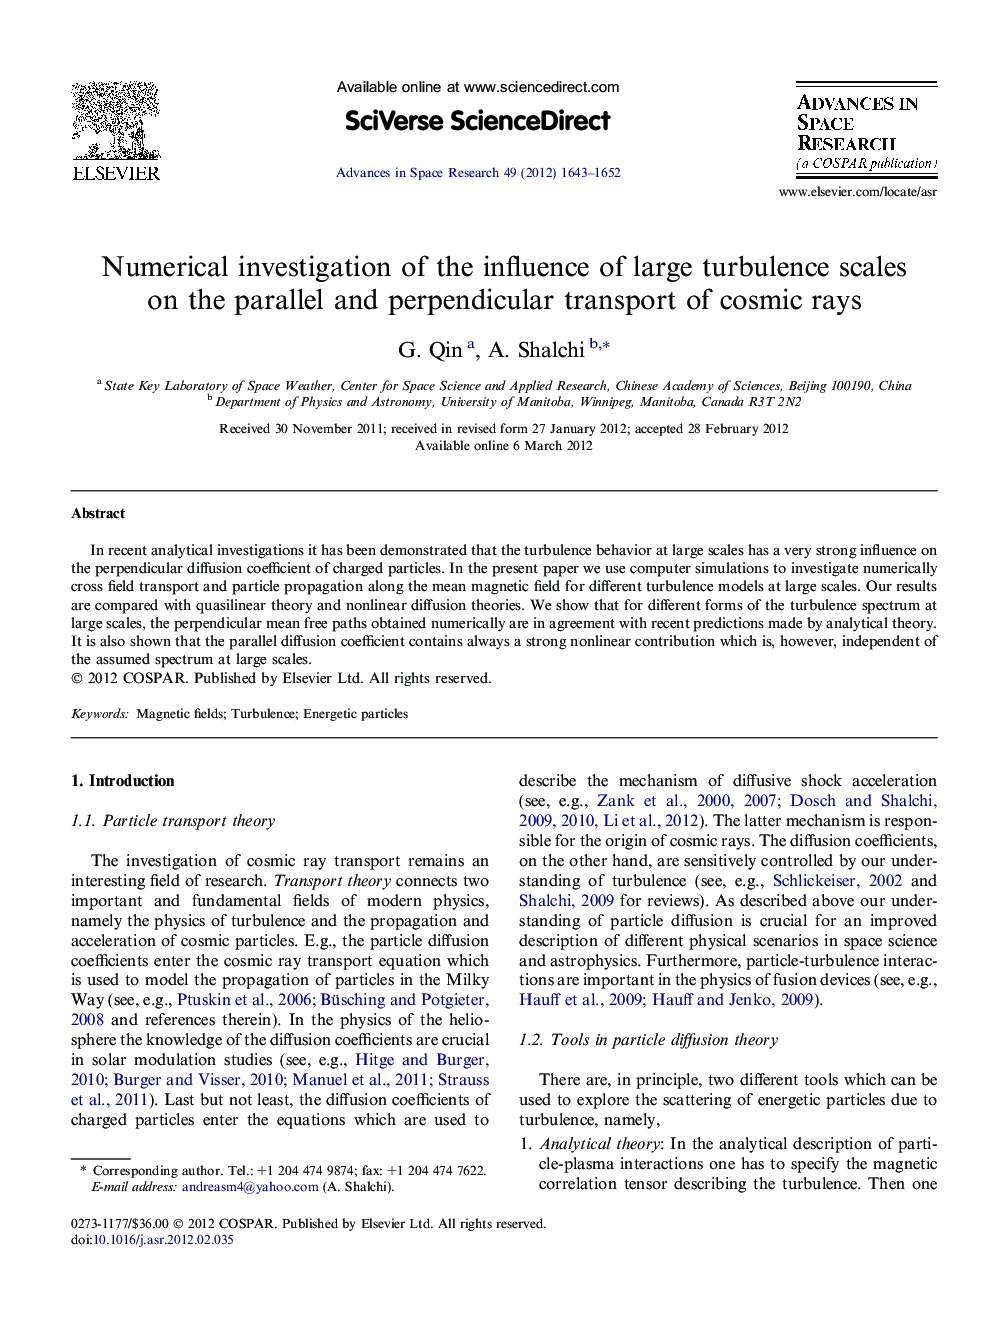 Numerical investigation of the influence of large turbulence scales on the parallel and perpendicular transport of cosmic rays